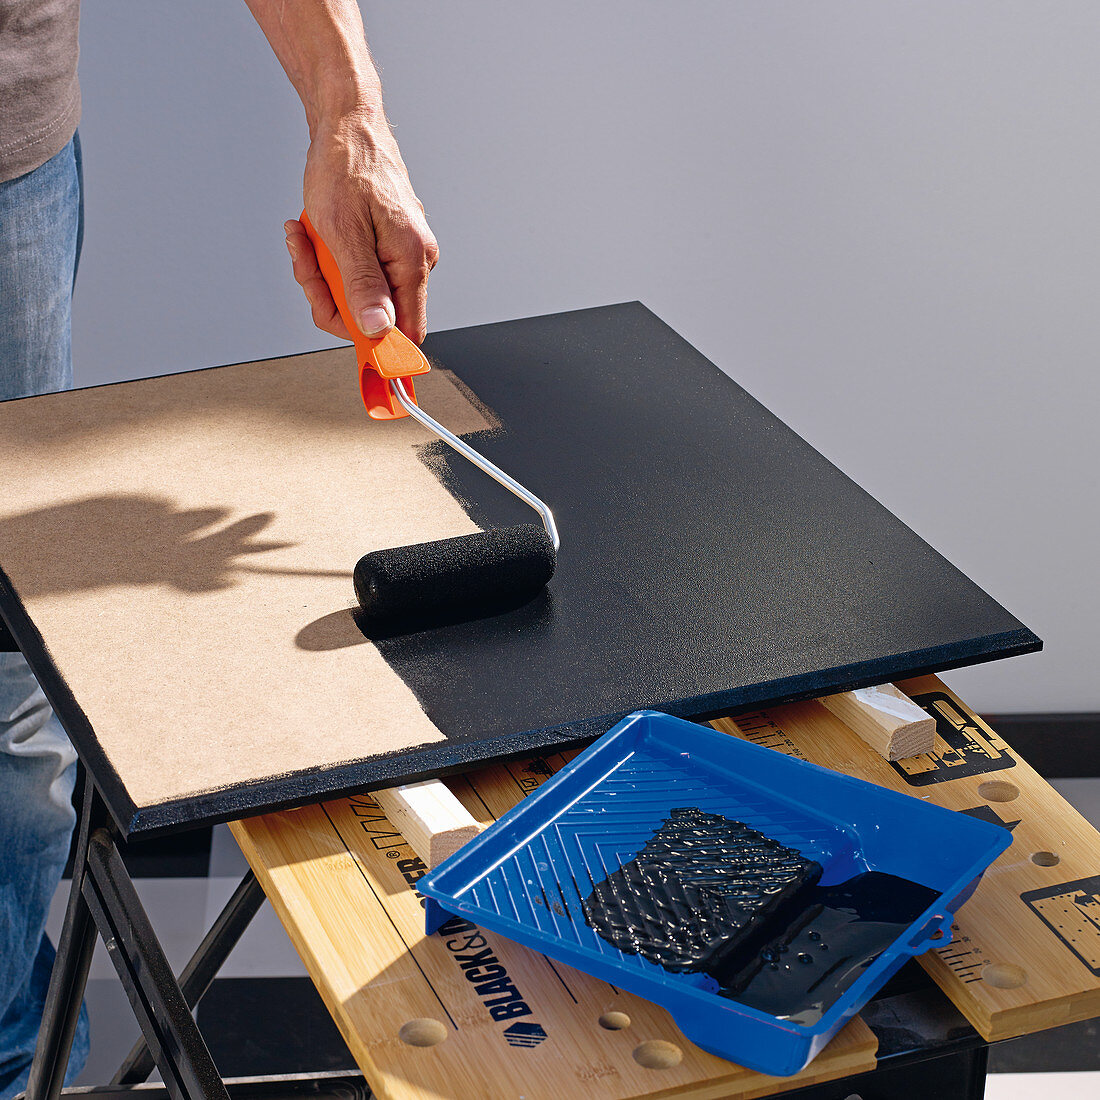 Painting an MDF board with chalkboard paint